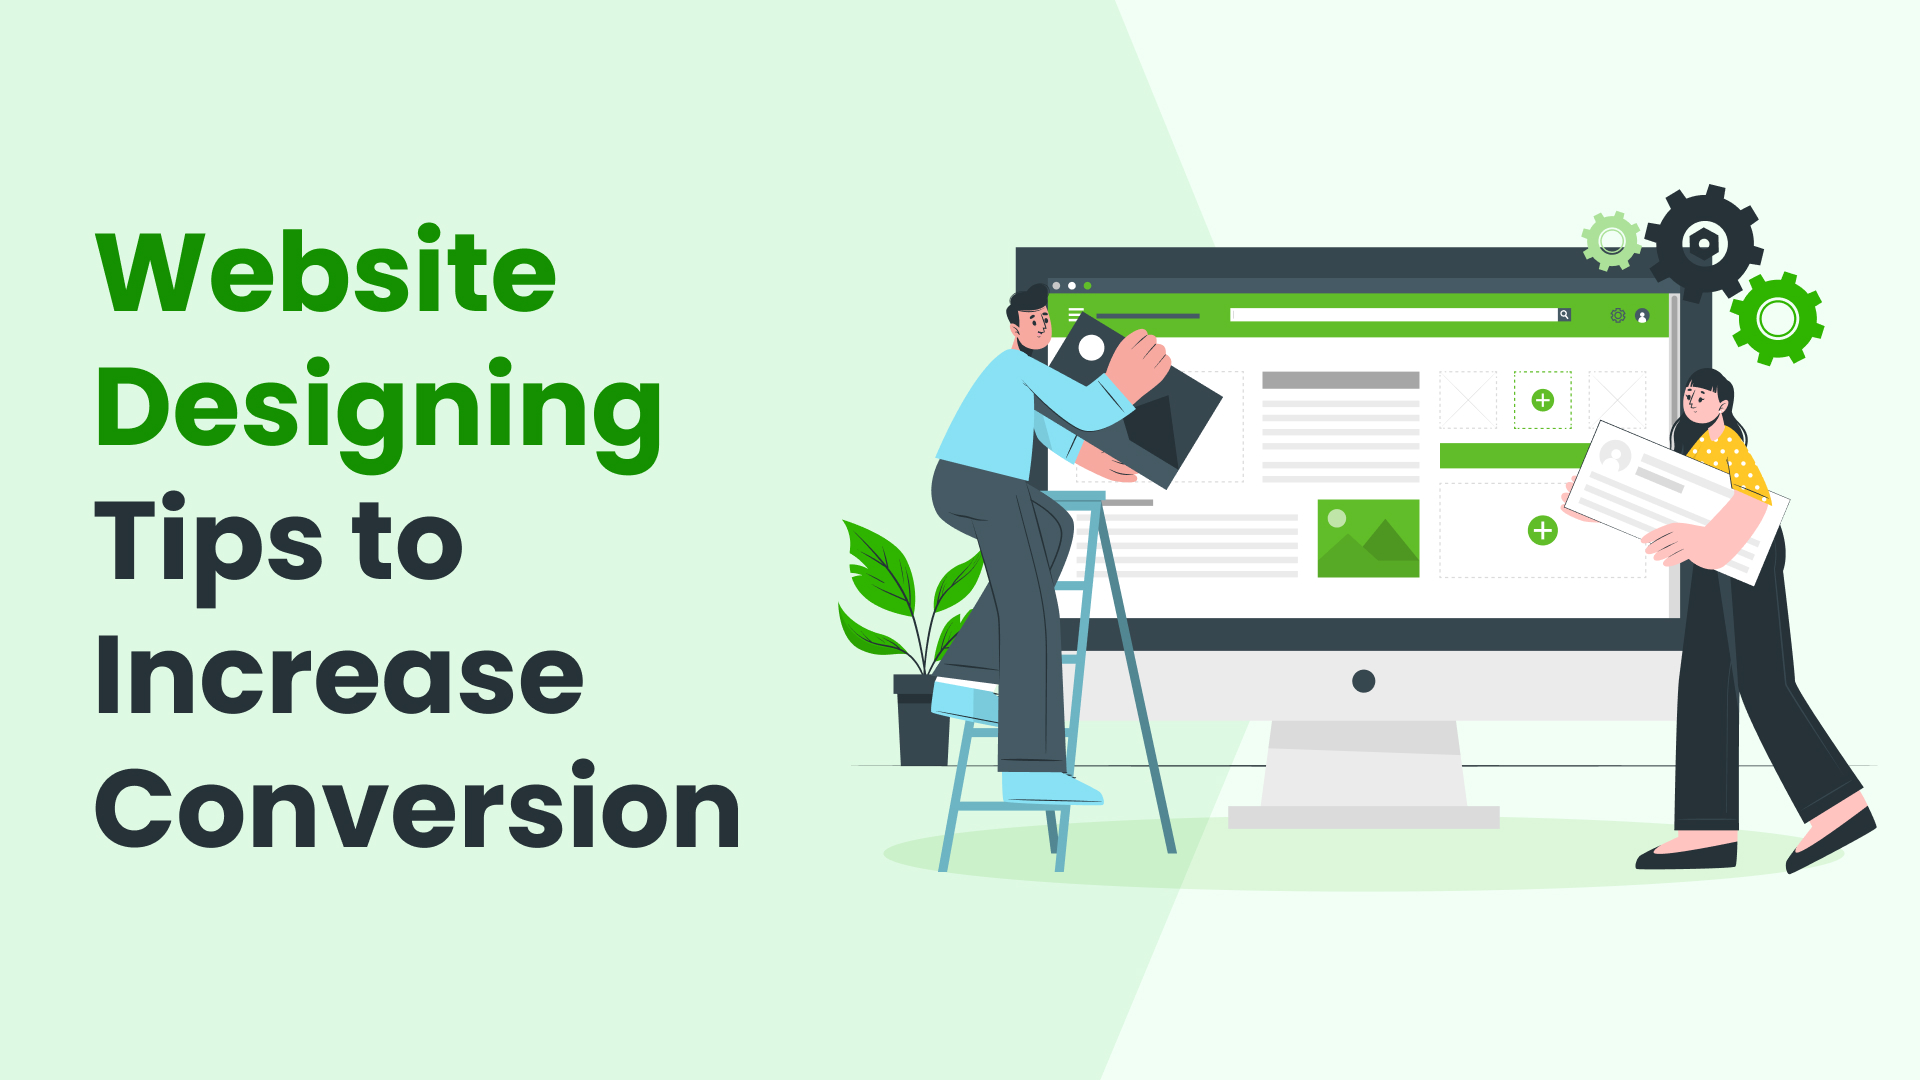 Website Designing Tips to Increase Conversion